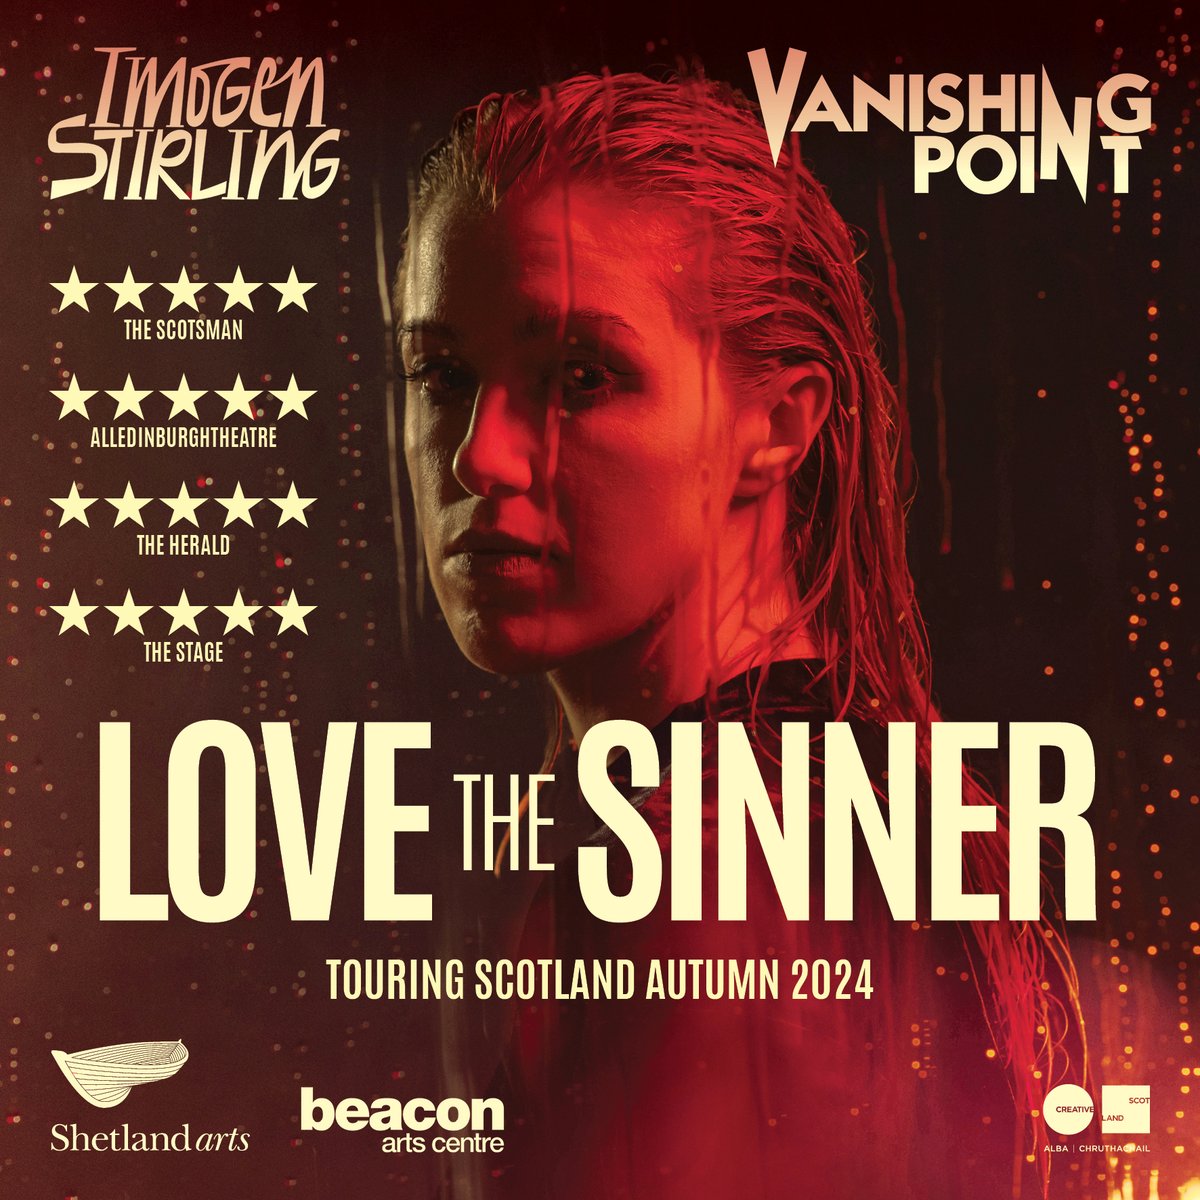 🔥 Love The Sinner, 2024 Tour Dates Announced! 🔥 The electrifying and pulsating Love The Sinner will tour 10 venues across Scotland this year after sell out runs and critical acclaim in 2023. Dates below. Find out more here - vanishing-point.org/love-the-sinner 📸 @mihaelabodlovic 1/4